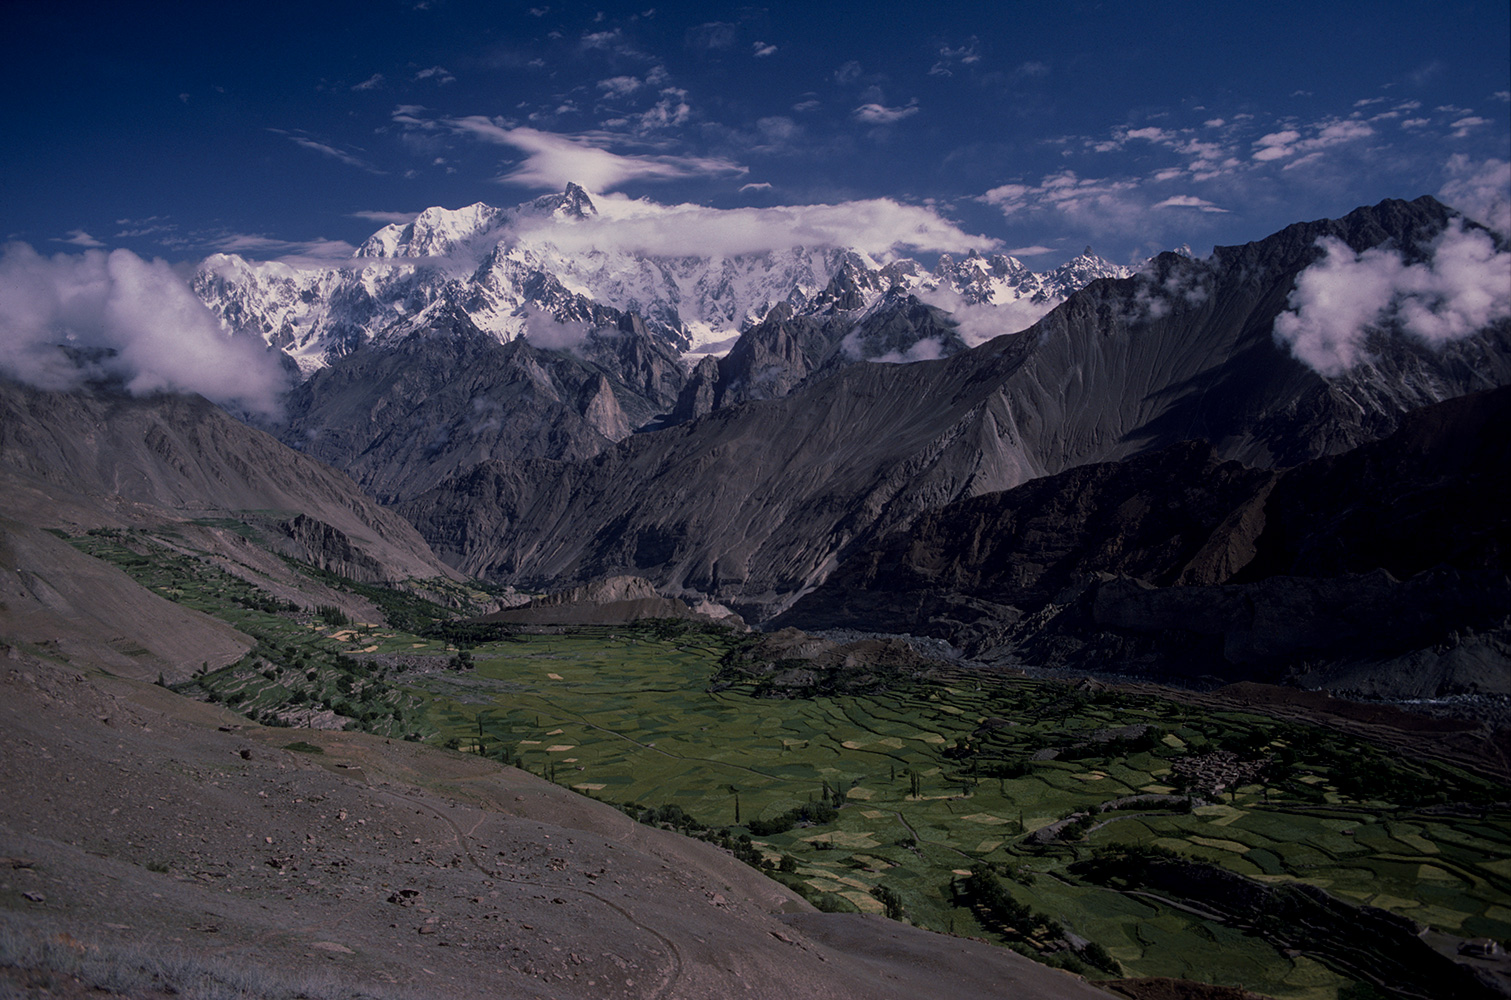 These are the southernmost peaks of the Batura Muztagh, towering over Karimabad in Hunza. 